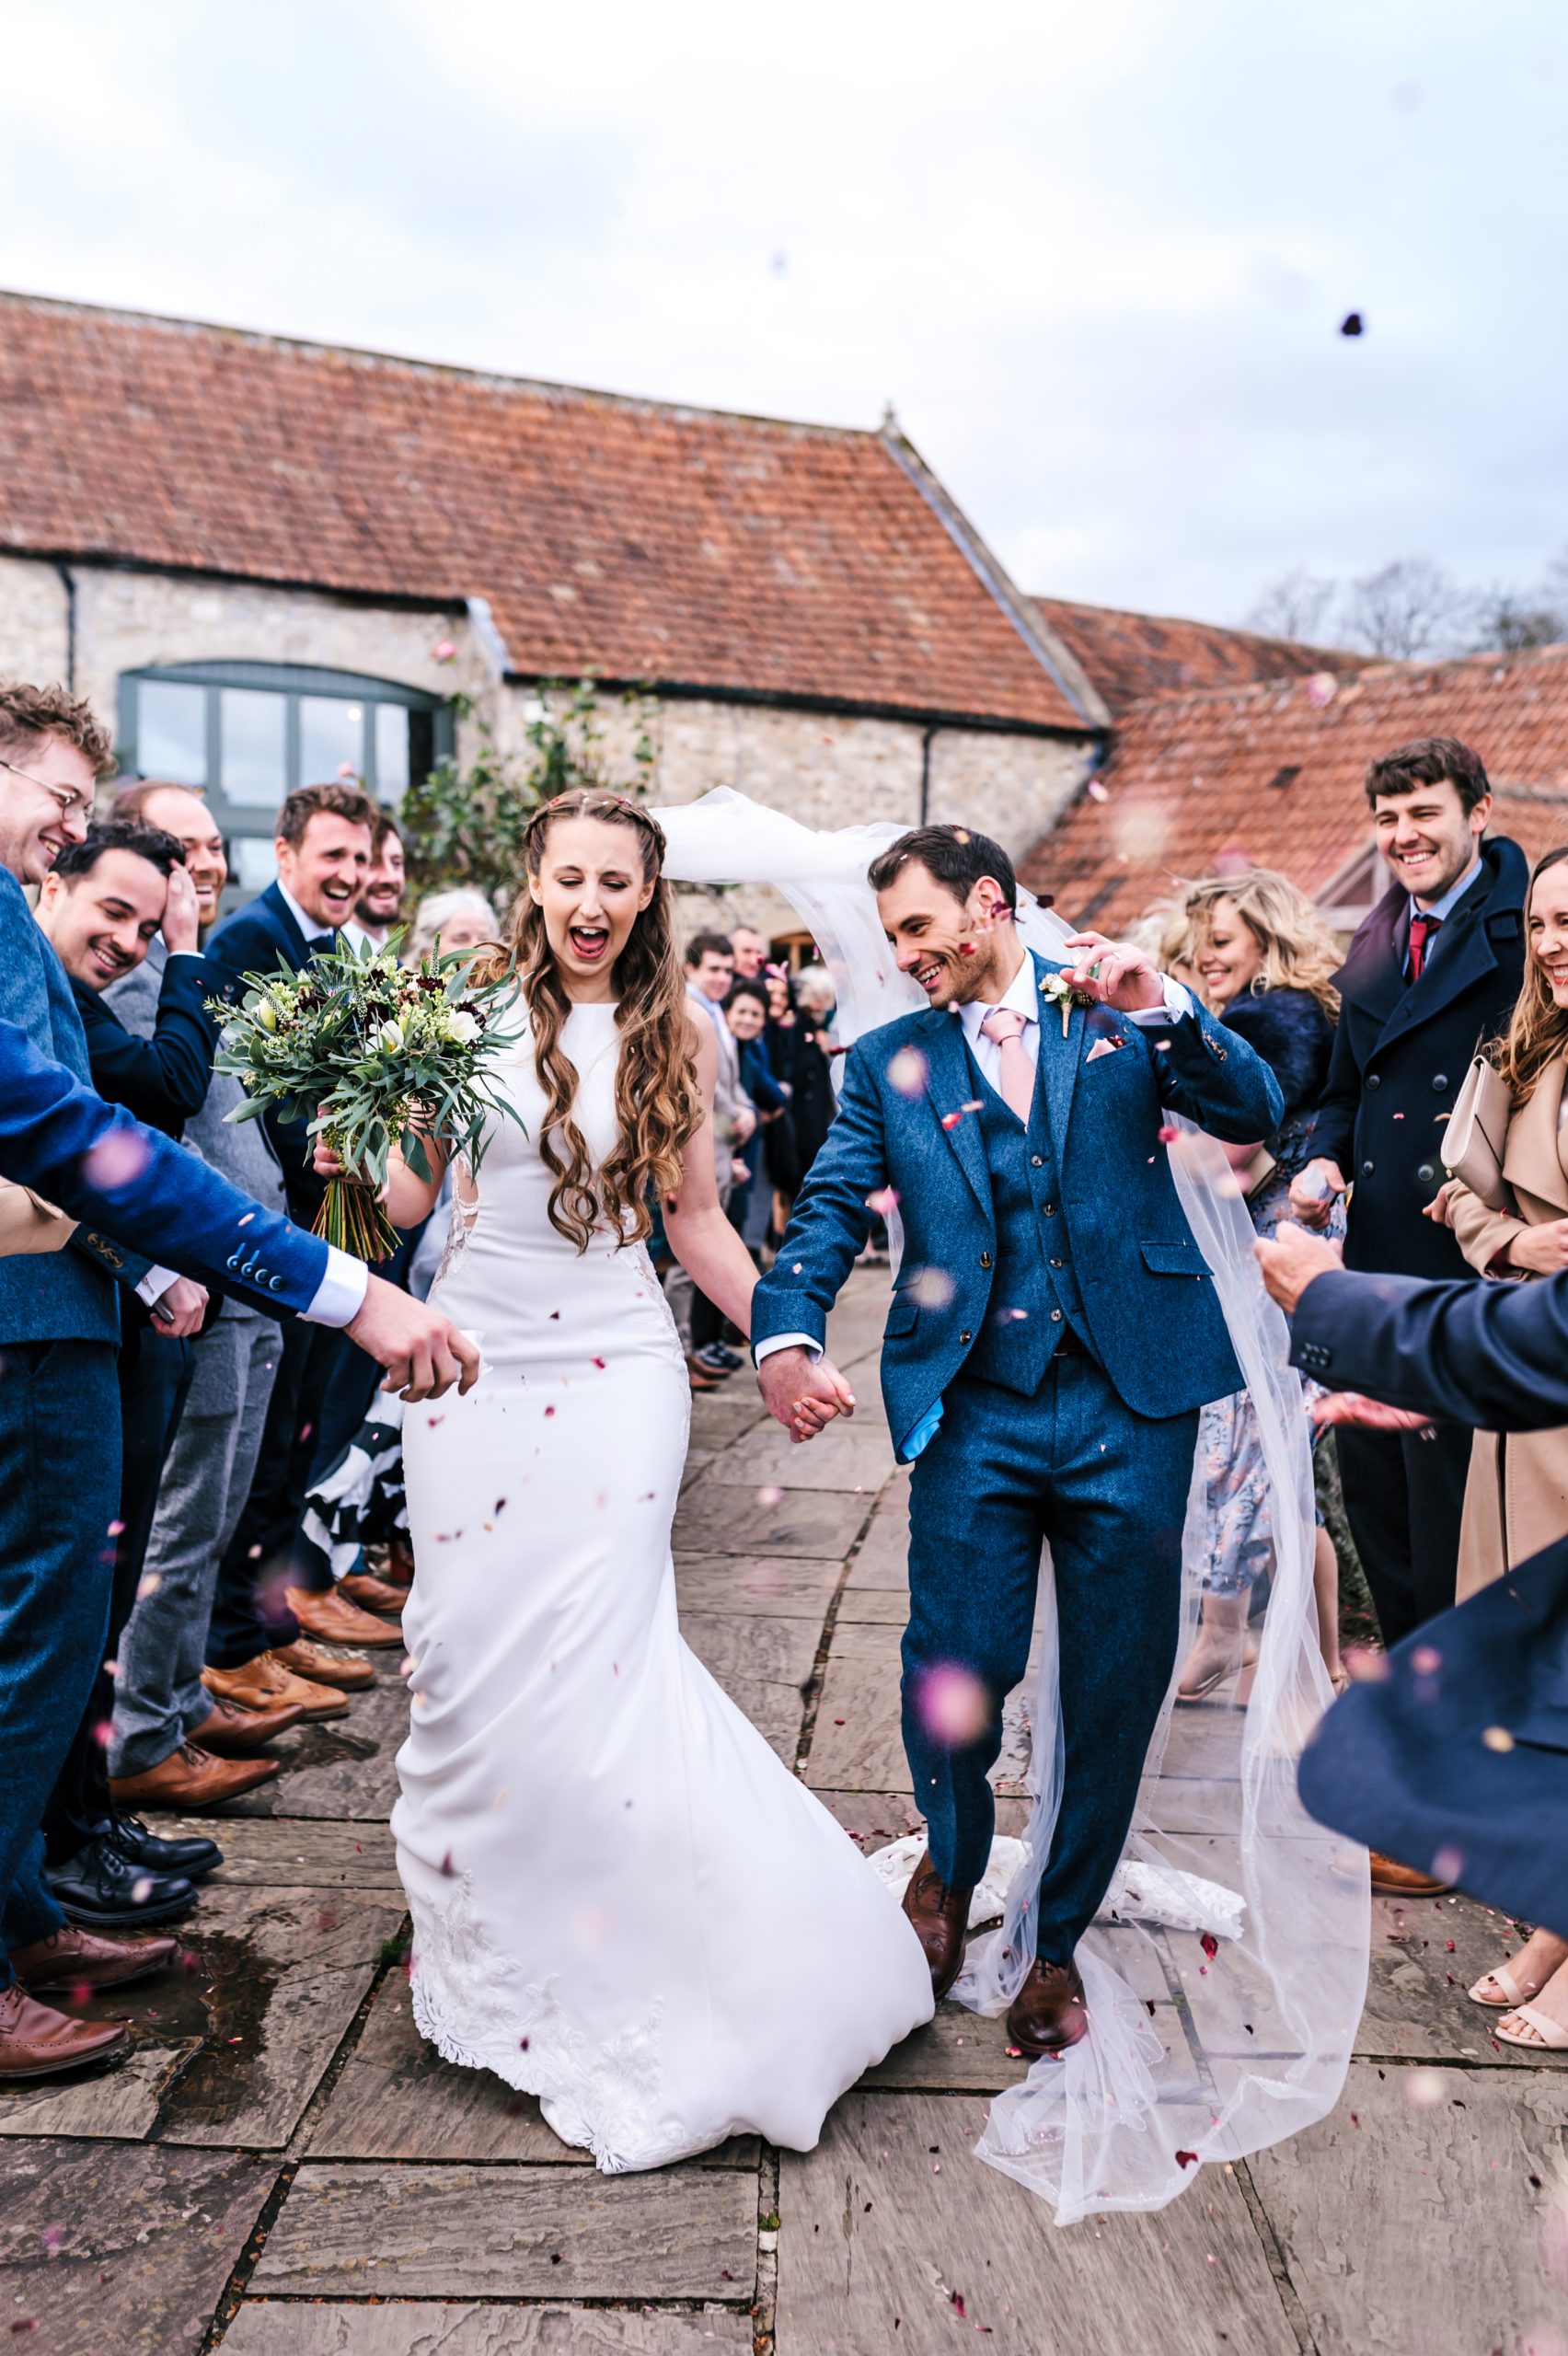 Priston Mill wedding with couple walking through confetti on a very windy day with the brides veil blowing in the wind and guests having a good time laughing.